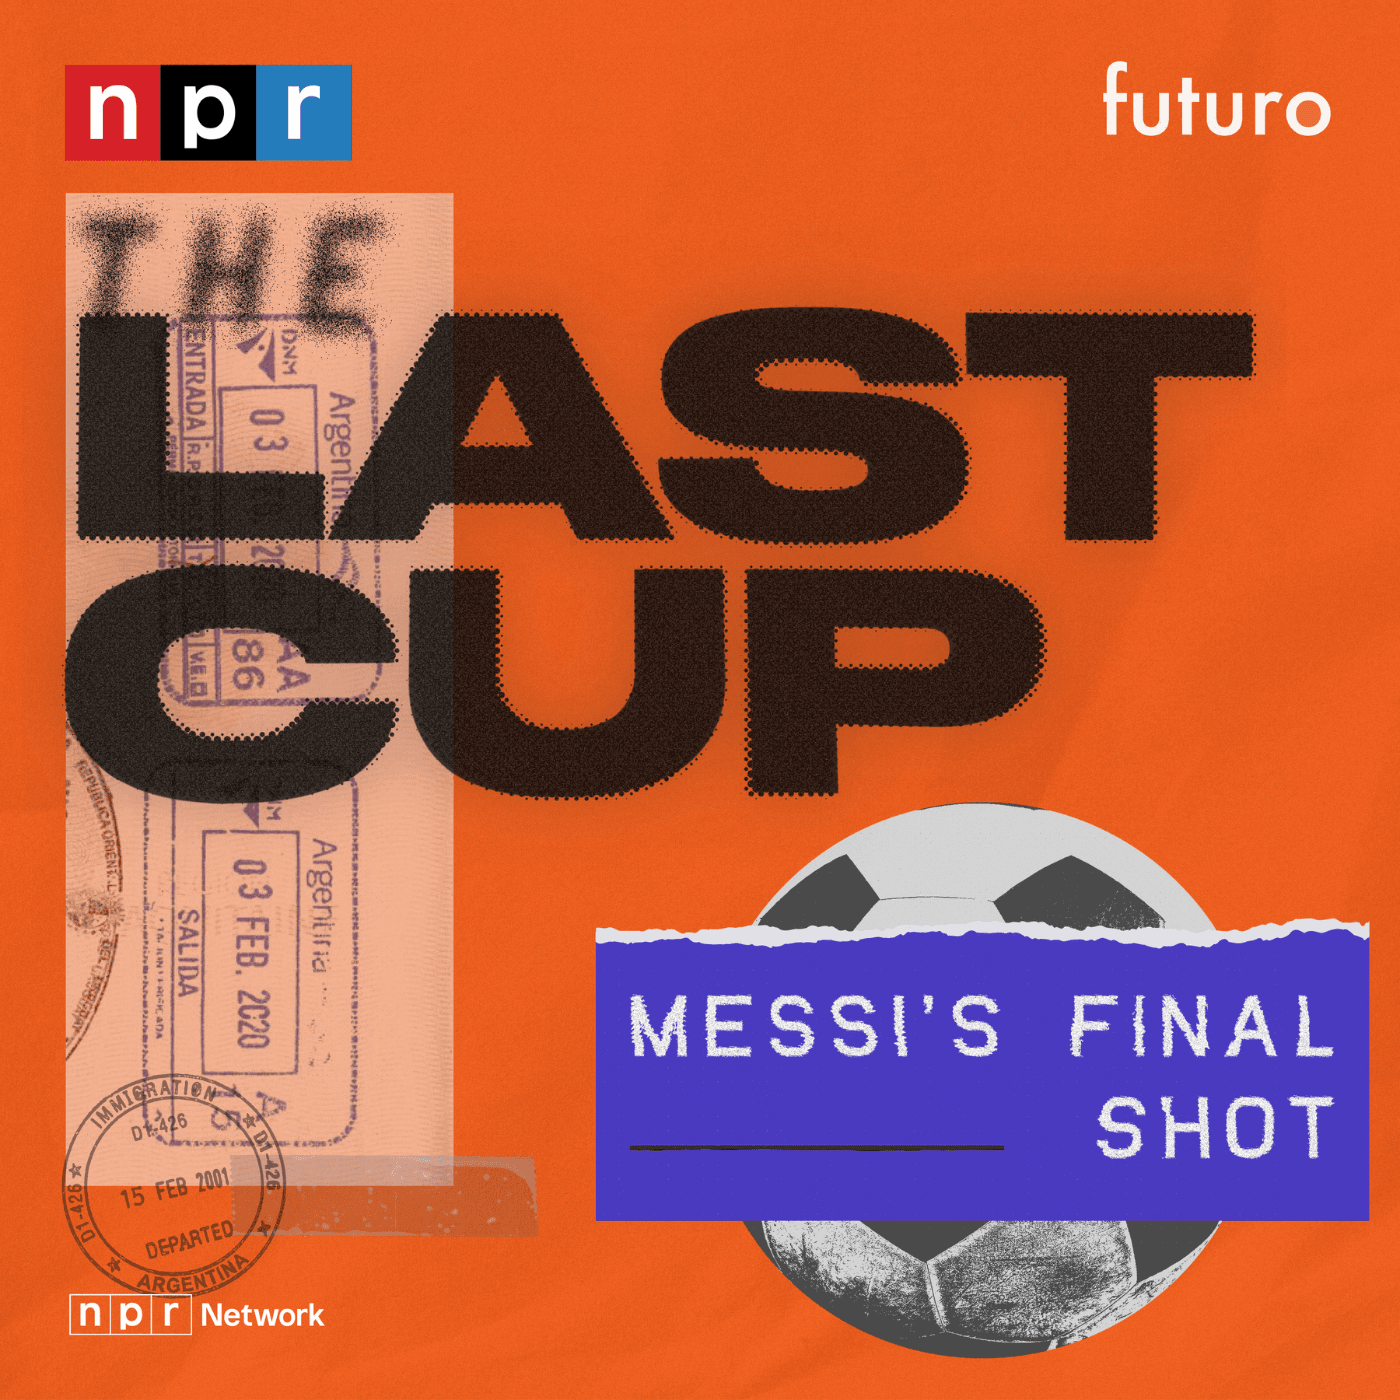 Thumbnail for "The Last Cup ".